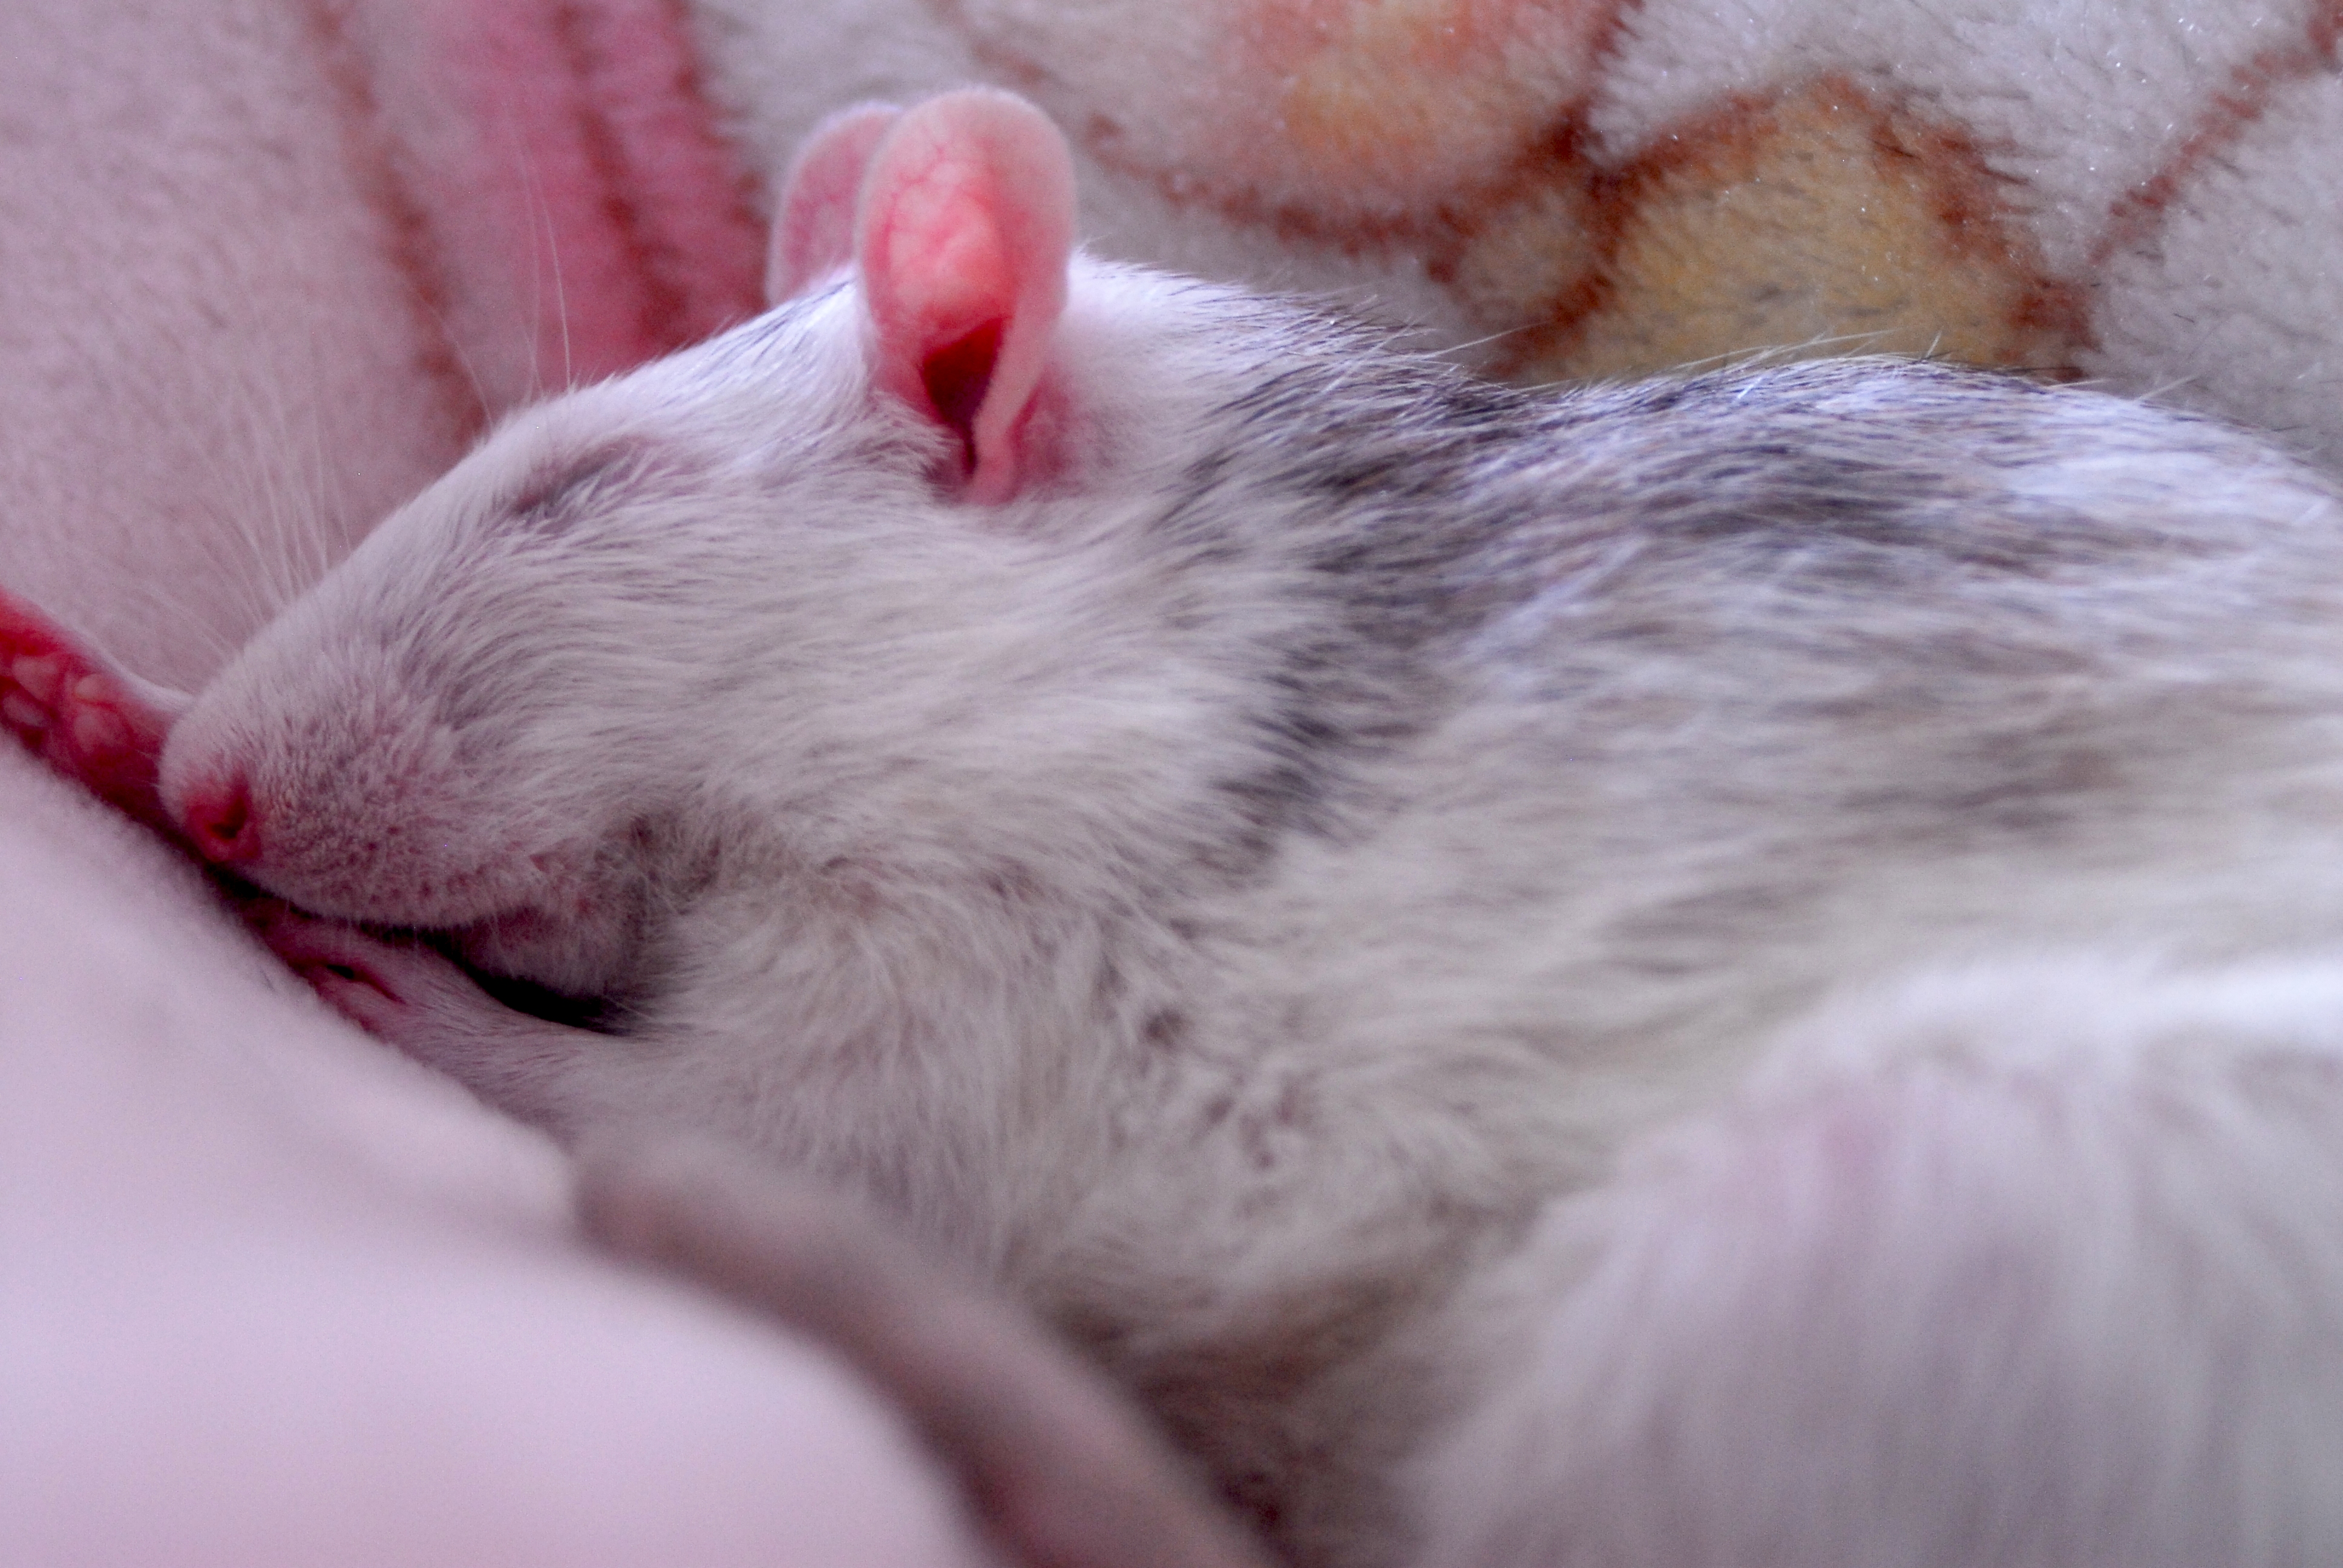 Sleeping rat has its eyes closed. Sometimes, rats will sleep with their eyes open; but it isn't very common. Photo Credit: Starsandspirals via Flickr